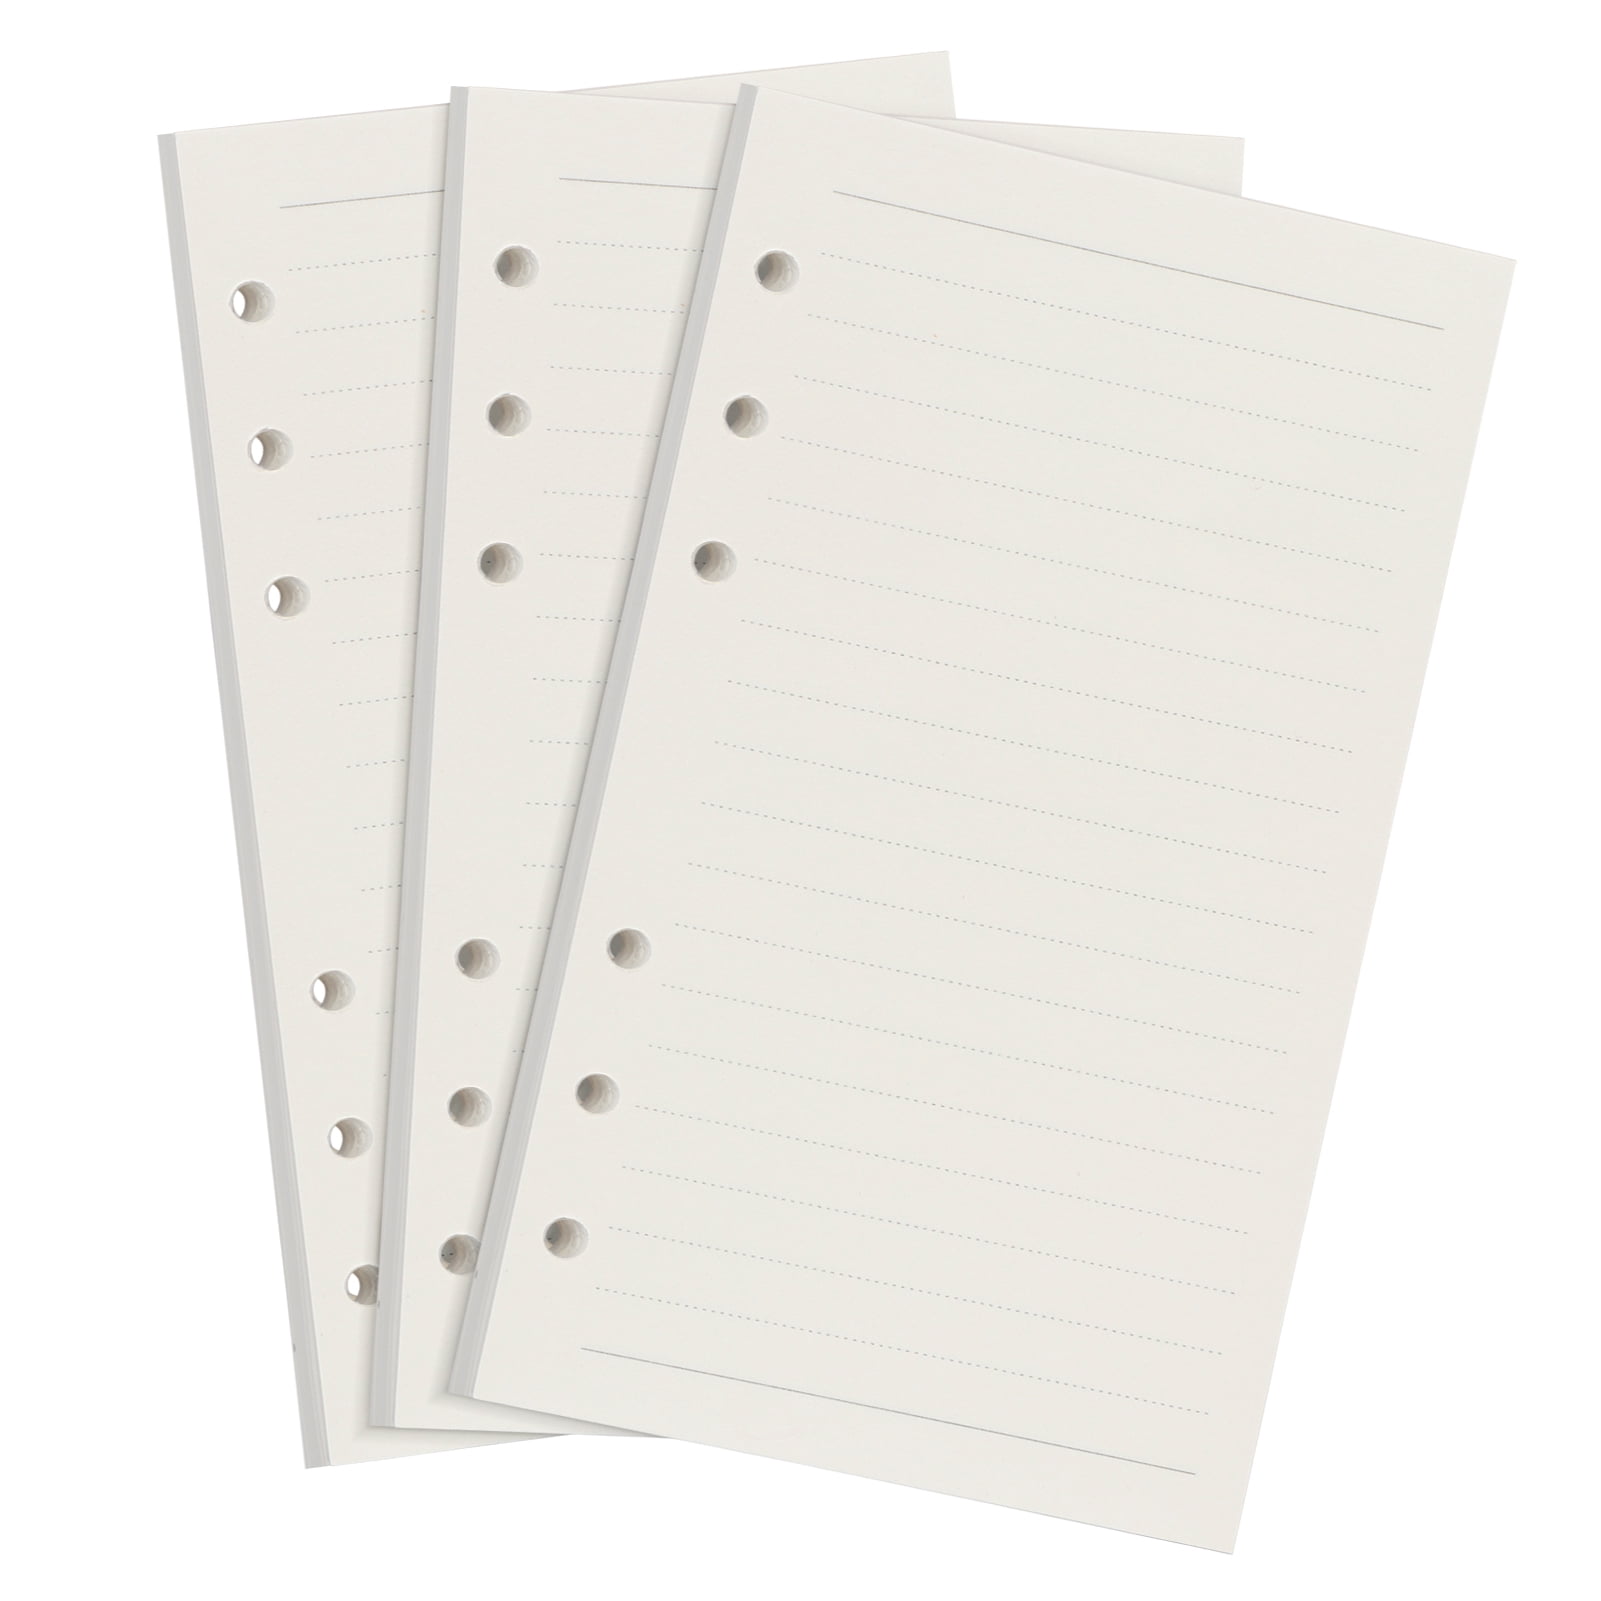 A6 Refill Paper 3 Pack Loose Leaf Paper 135 Sheets 270 Pages 6-Holes Inserts Lined Filler Paper Leather Journal Notebook Refillable Paper for 6 Ring Refillable A6 Binder Notebook Planner 